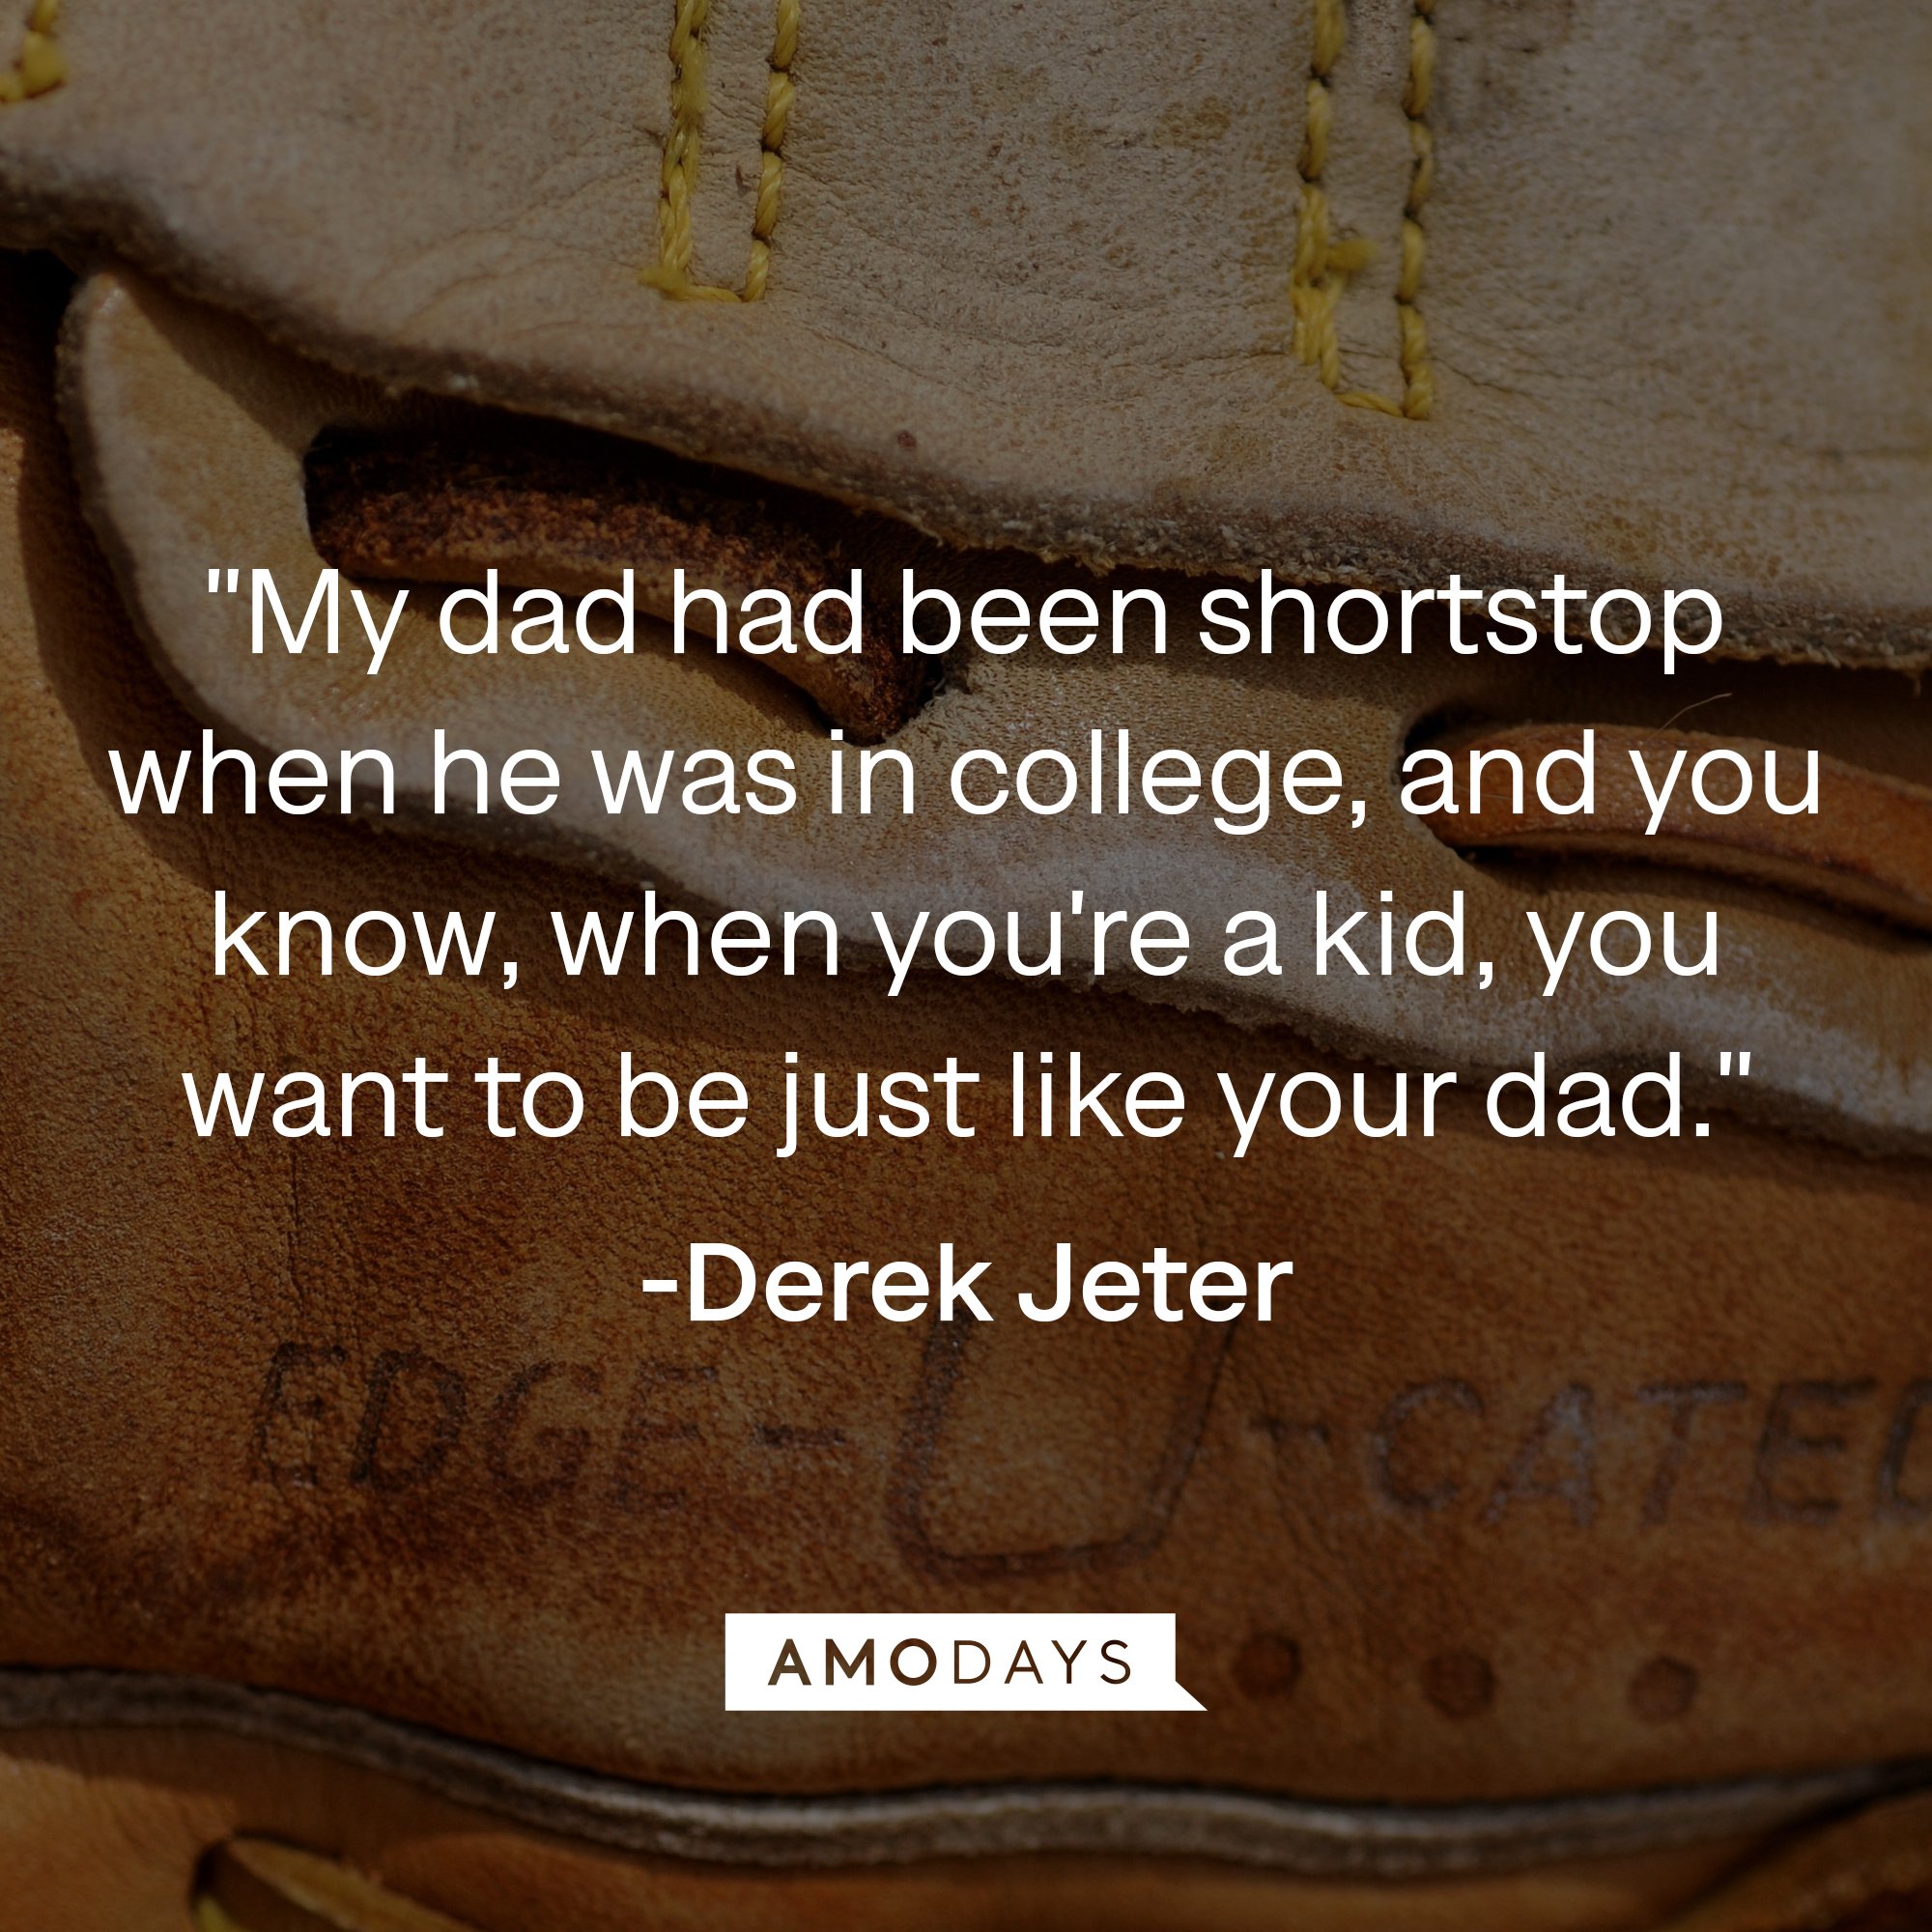 Derek Jeter's quote: "My dad had been shortstop when he was in college, and you know, when you're a kid, you want to be just like your dad." | Image: AmoDays